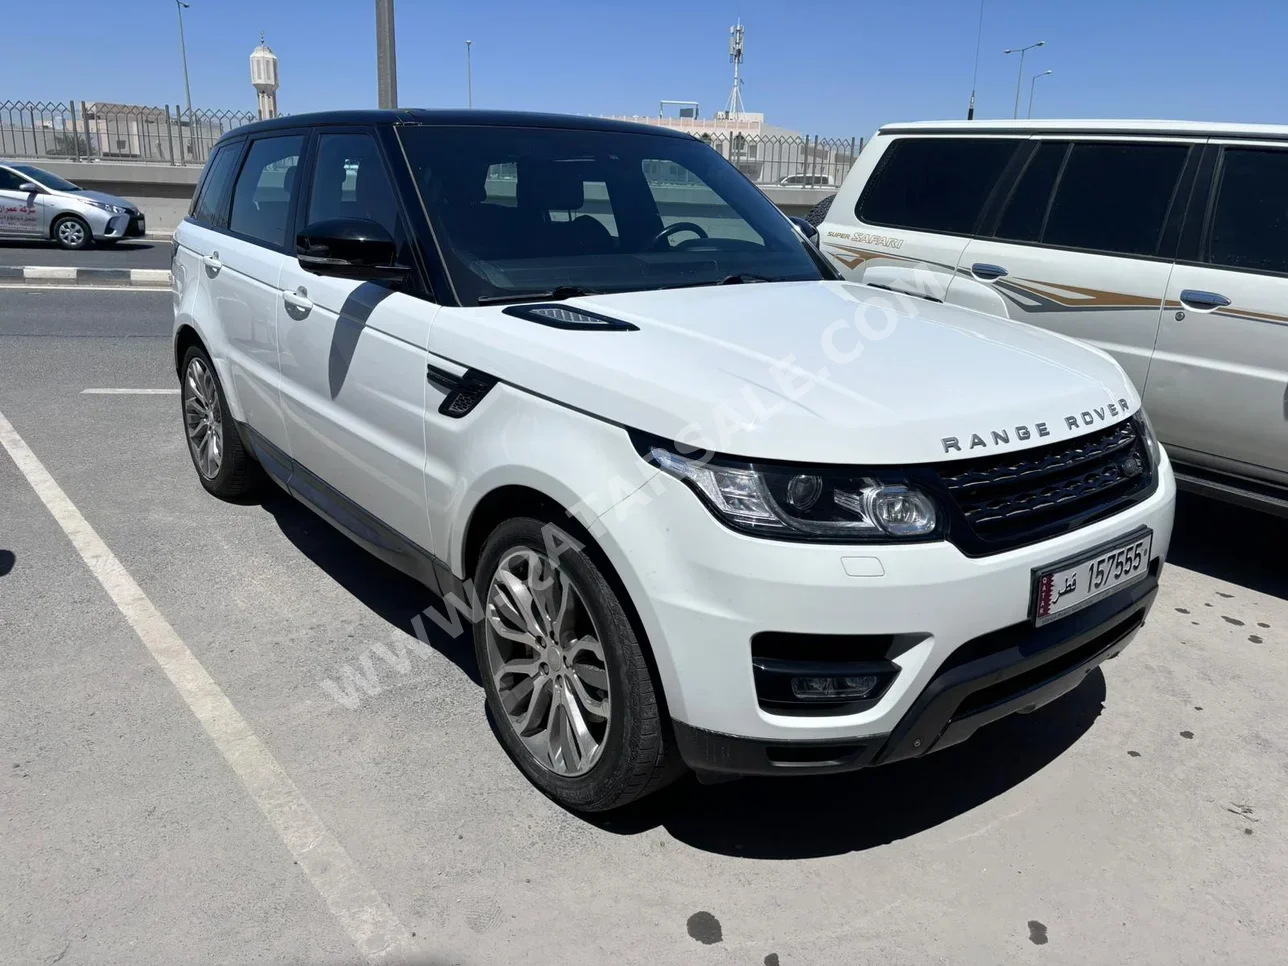 Land Rover  Range Rover  Sport Super charged  2014  Automatic  196,000 Km  8 Cylinder  Four Wheel Drive (4WD)  SUV  White